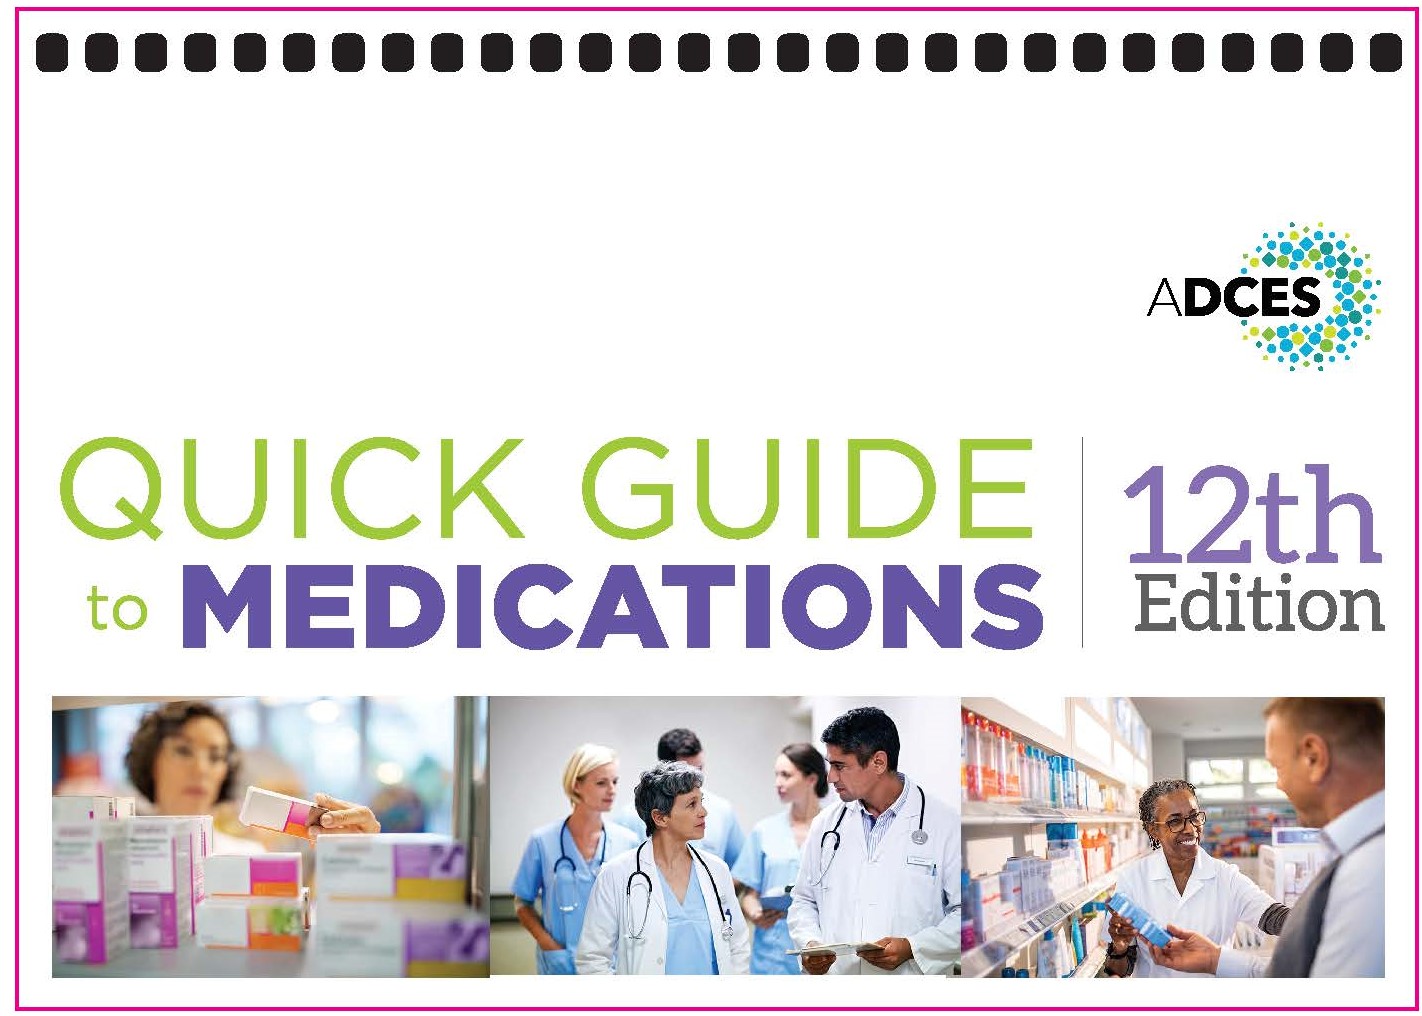 Quick Guide to Medications, 12th edition